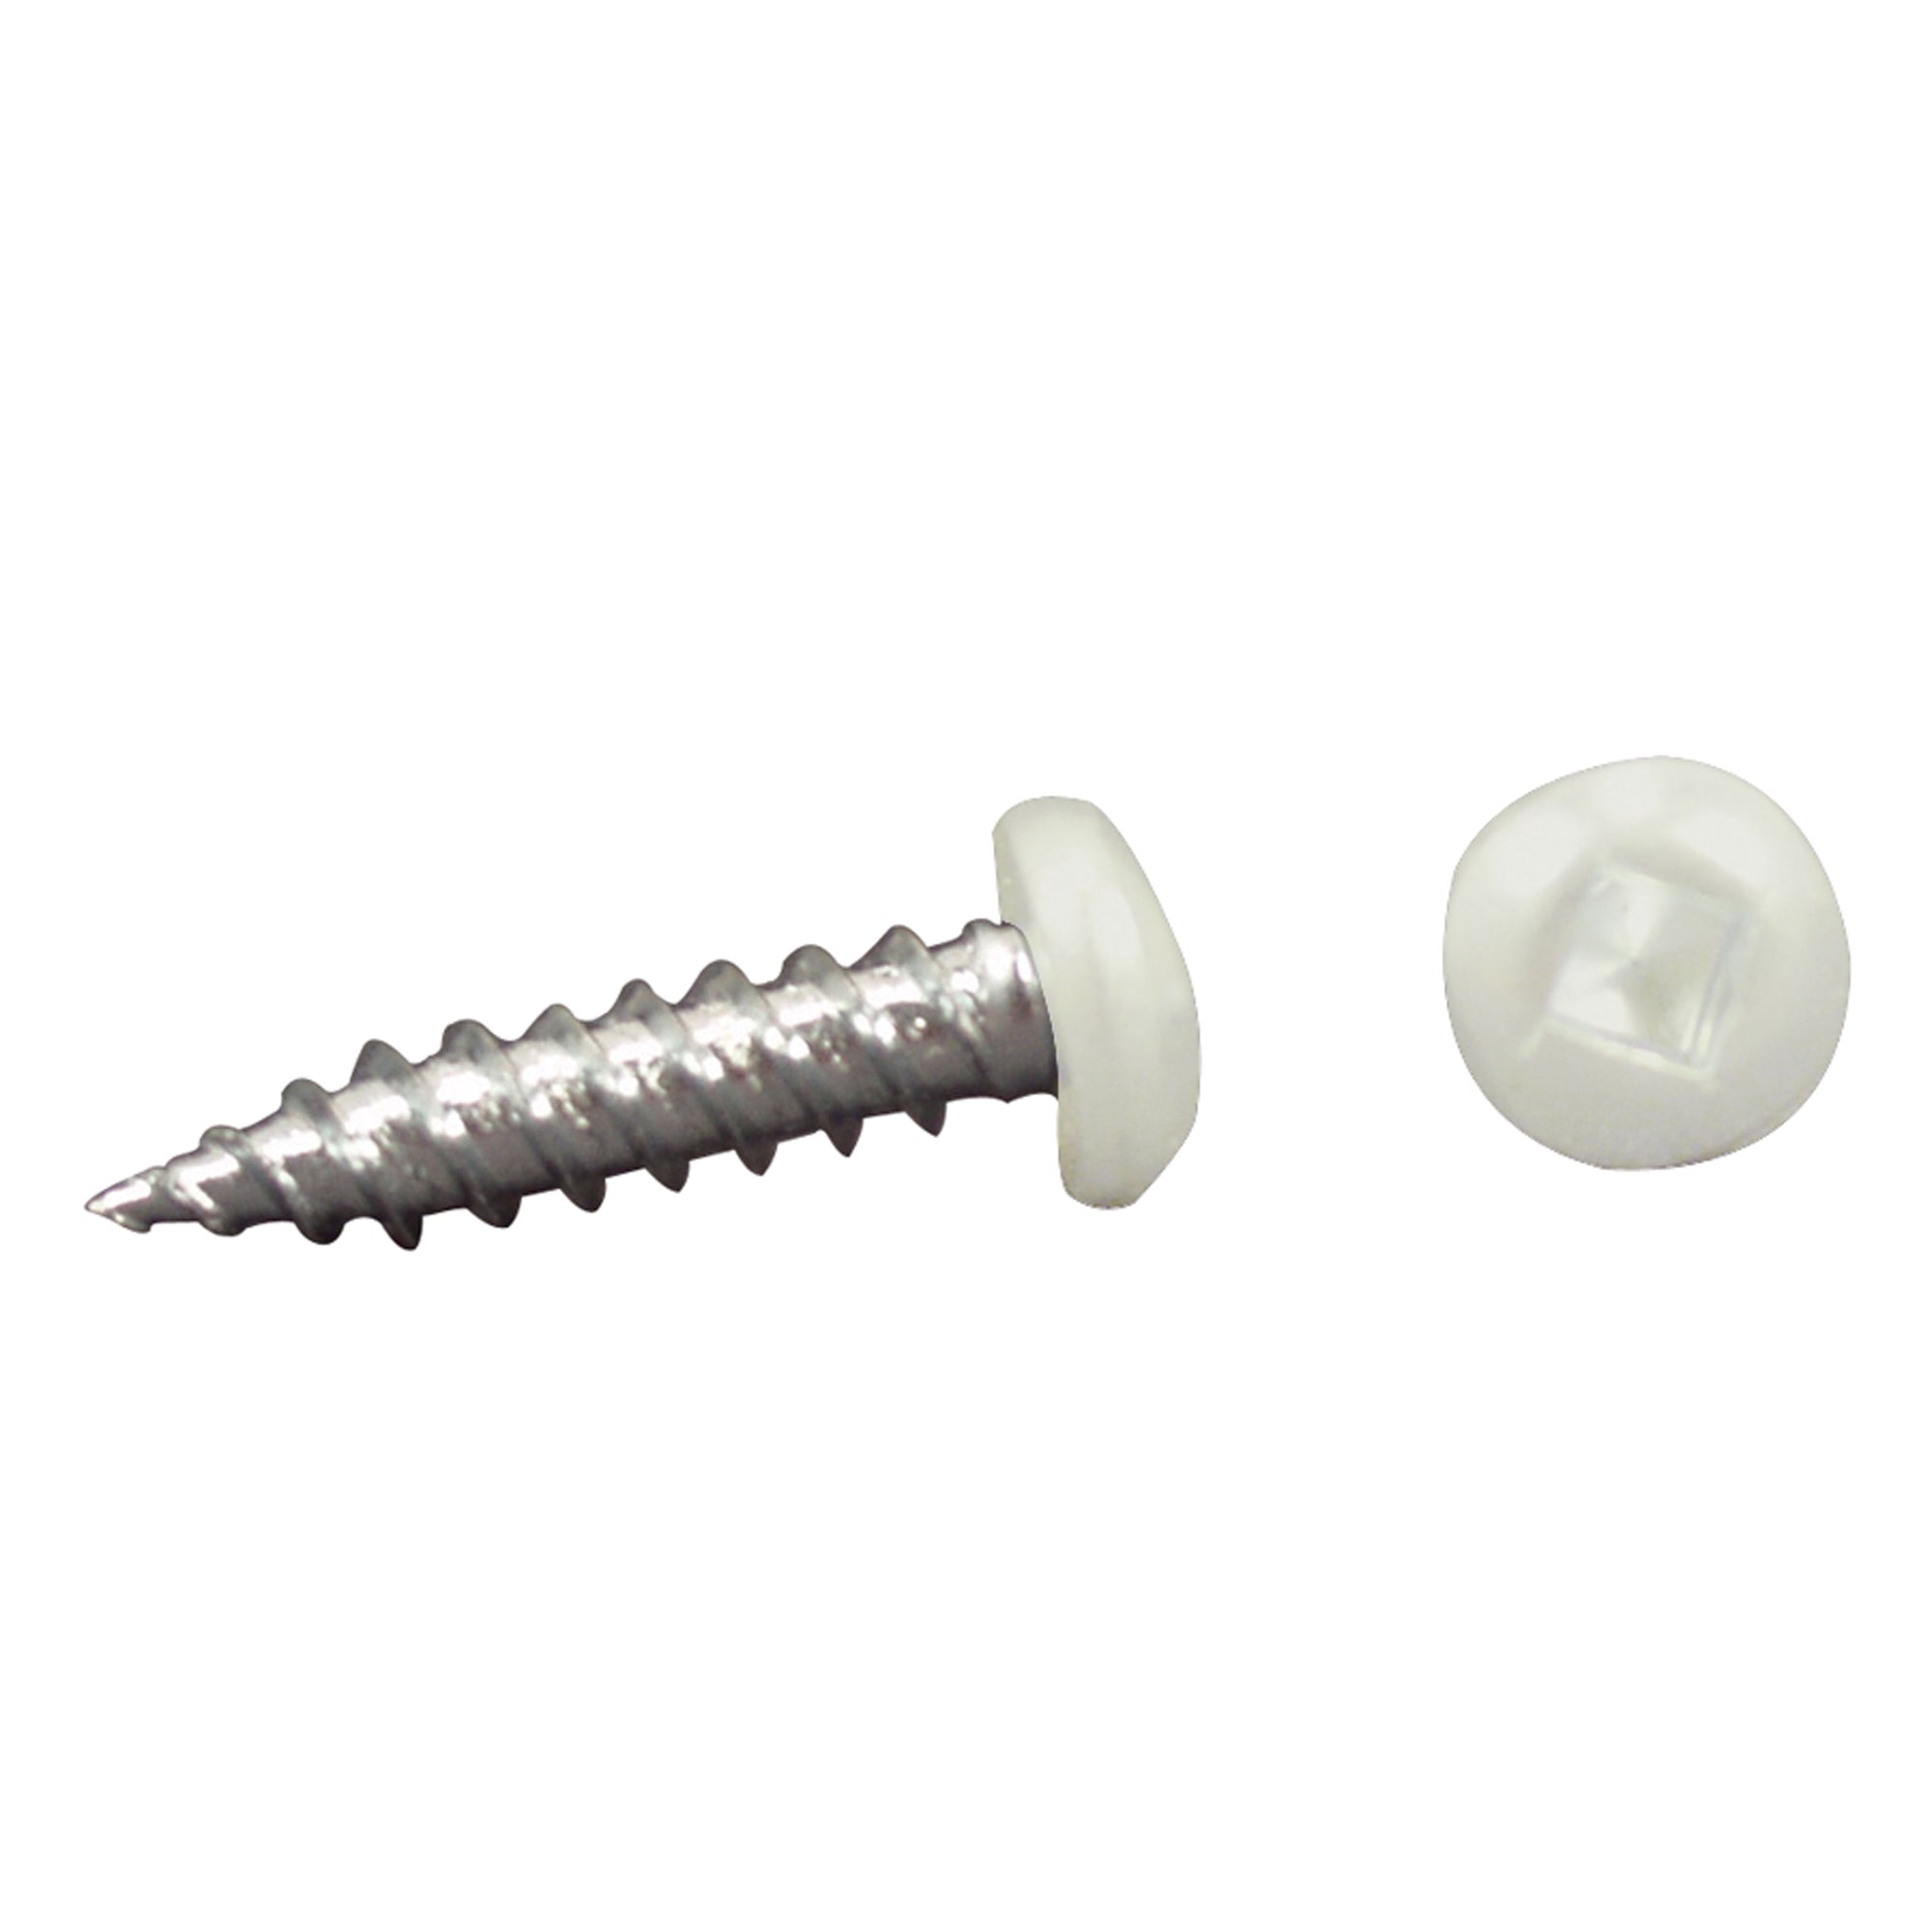 AP Products 012-PSQ500 W 8 X 1 Pan Head Square Recess Screw, Pack of 500 - 1", White